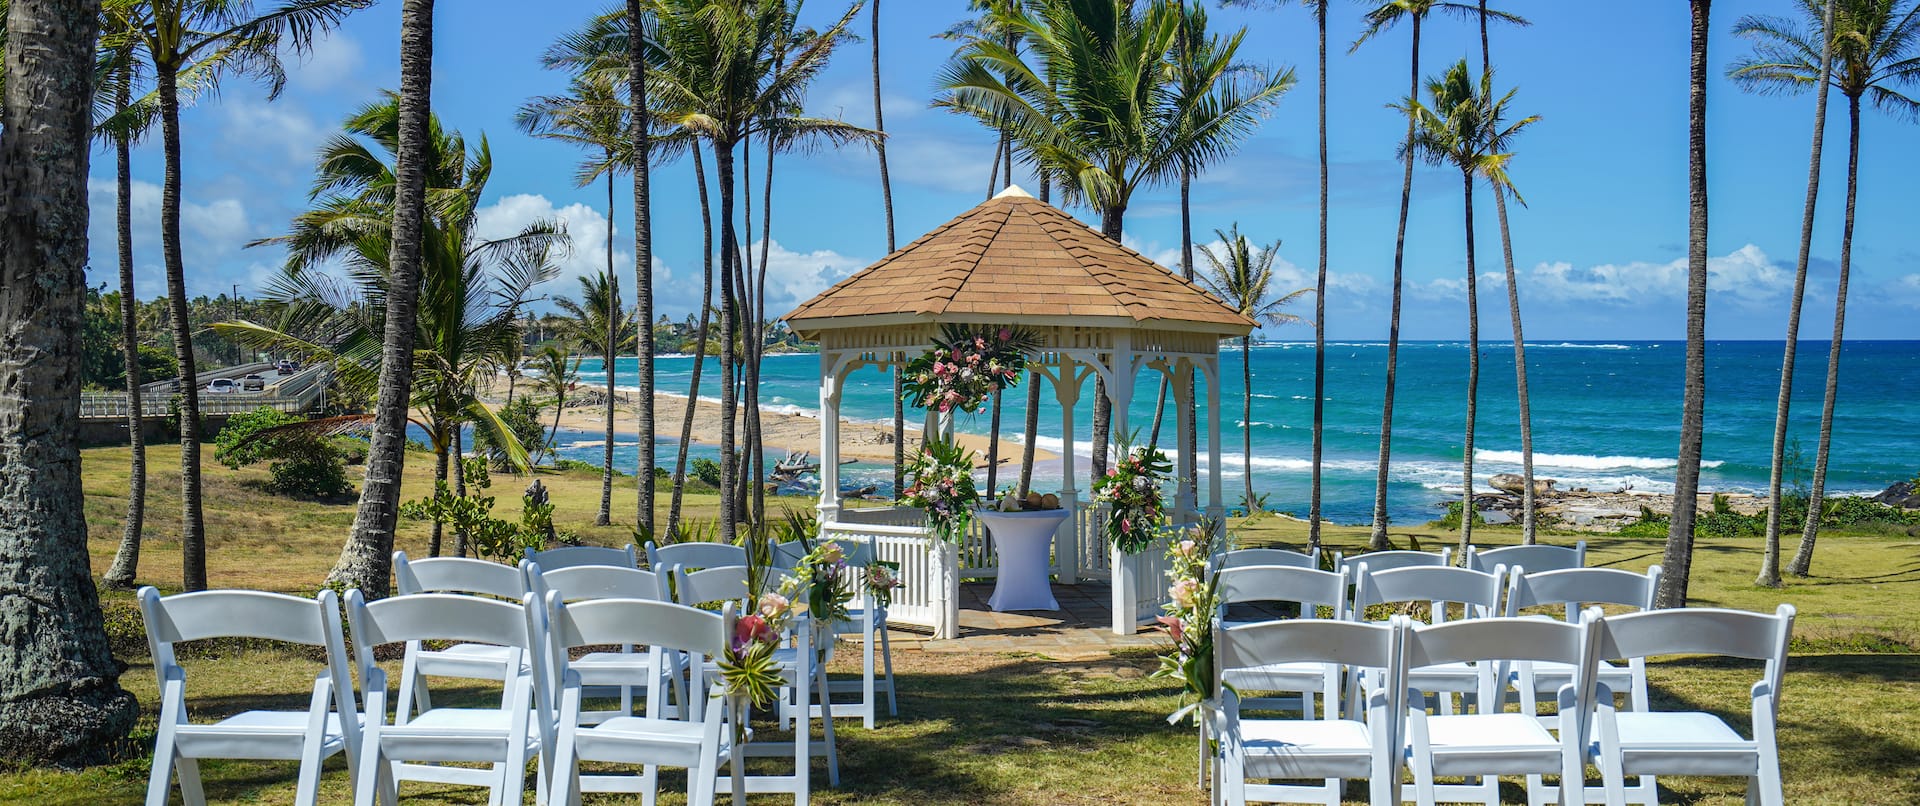 Wedding Celebration on a Lawn with Ocean Views